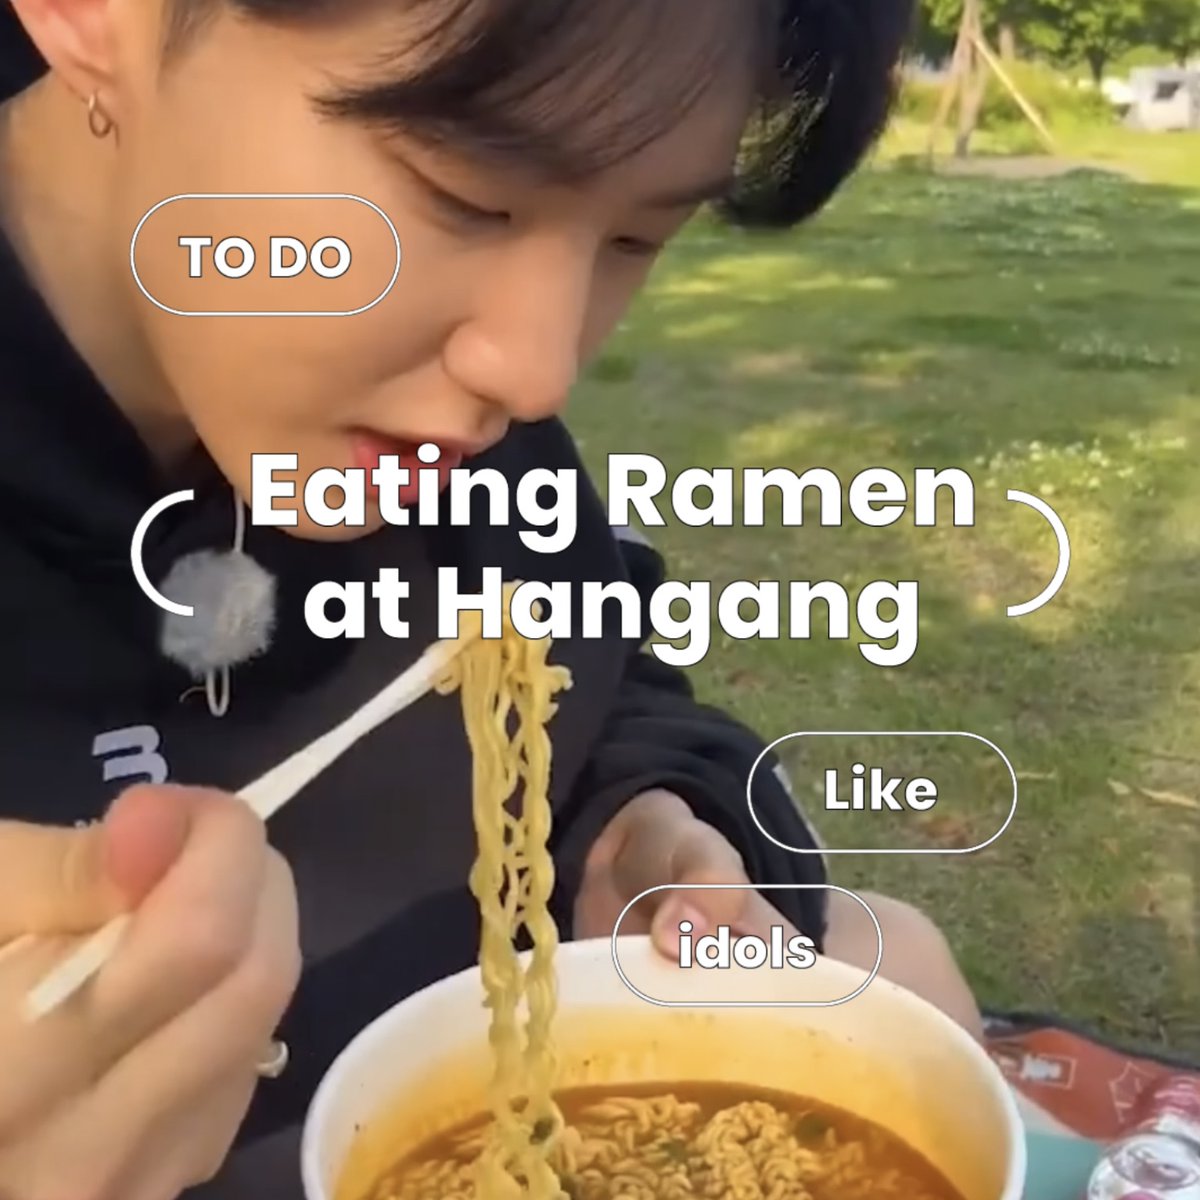 Hey everyone!
We'll show you how to eat ramen by the Han River like an idol!😎 Super fun!
If you ever visit Korea, make sure to stop by Han River Park and give it a try. It's an amazing experience!💗👀

🔗instagram.com/reel/CzYEXdUyH…